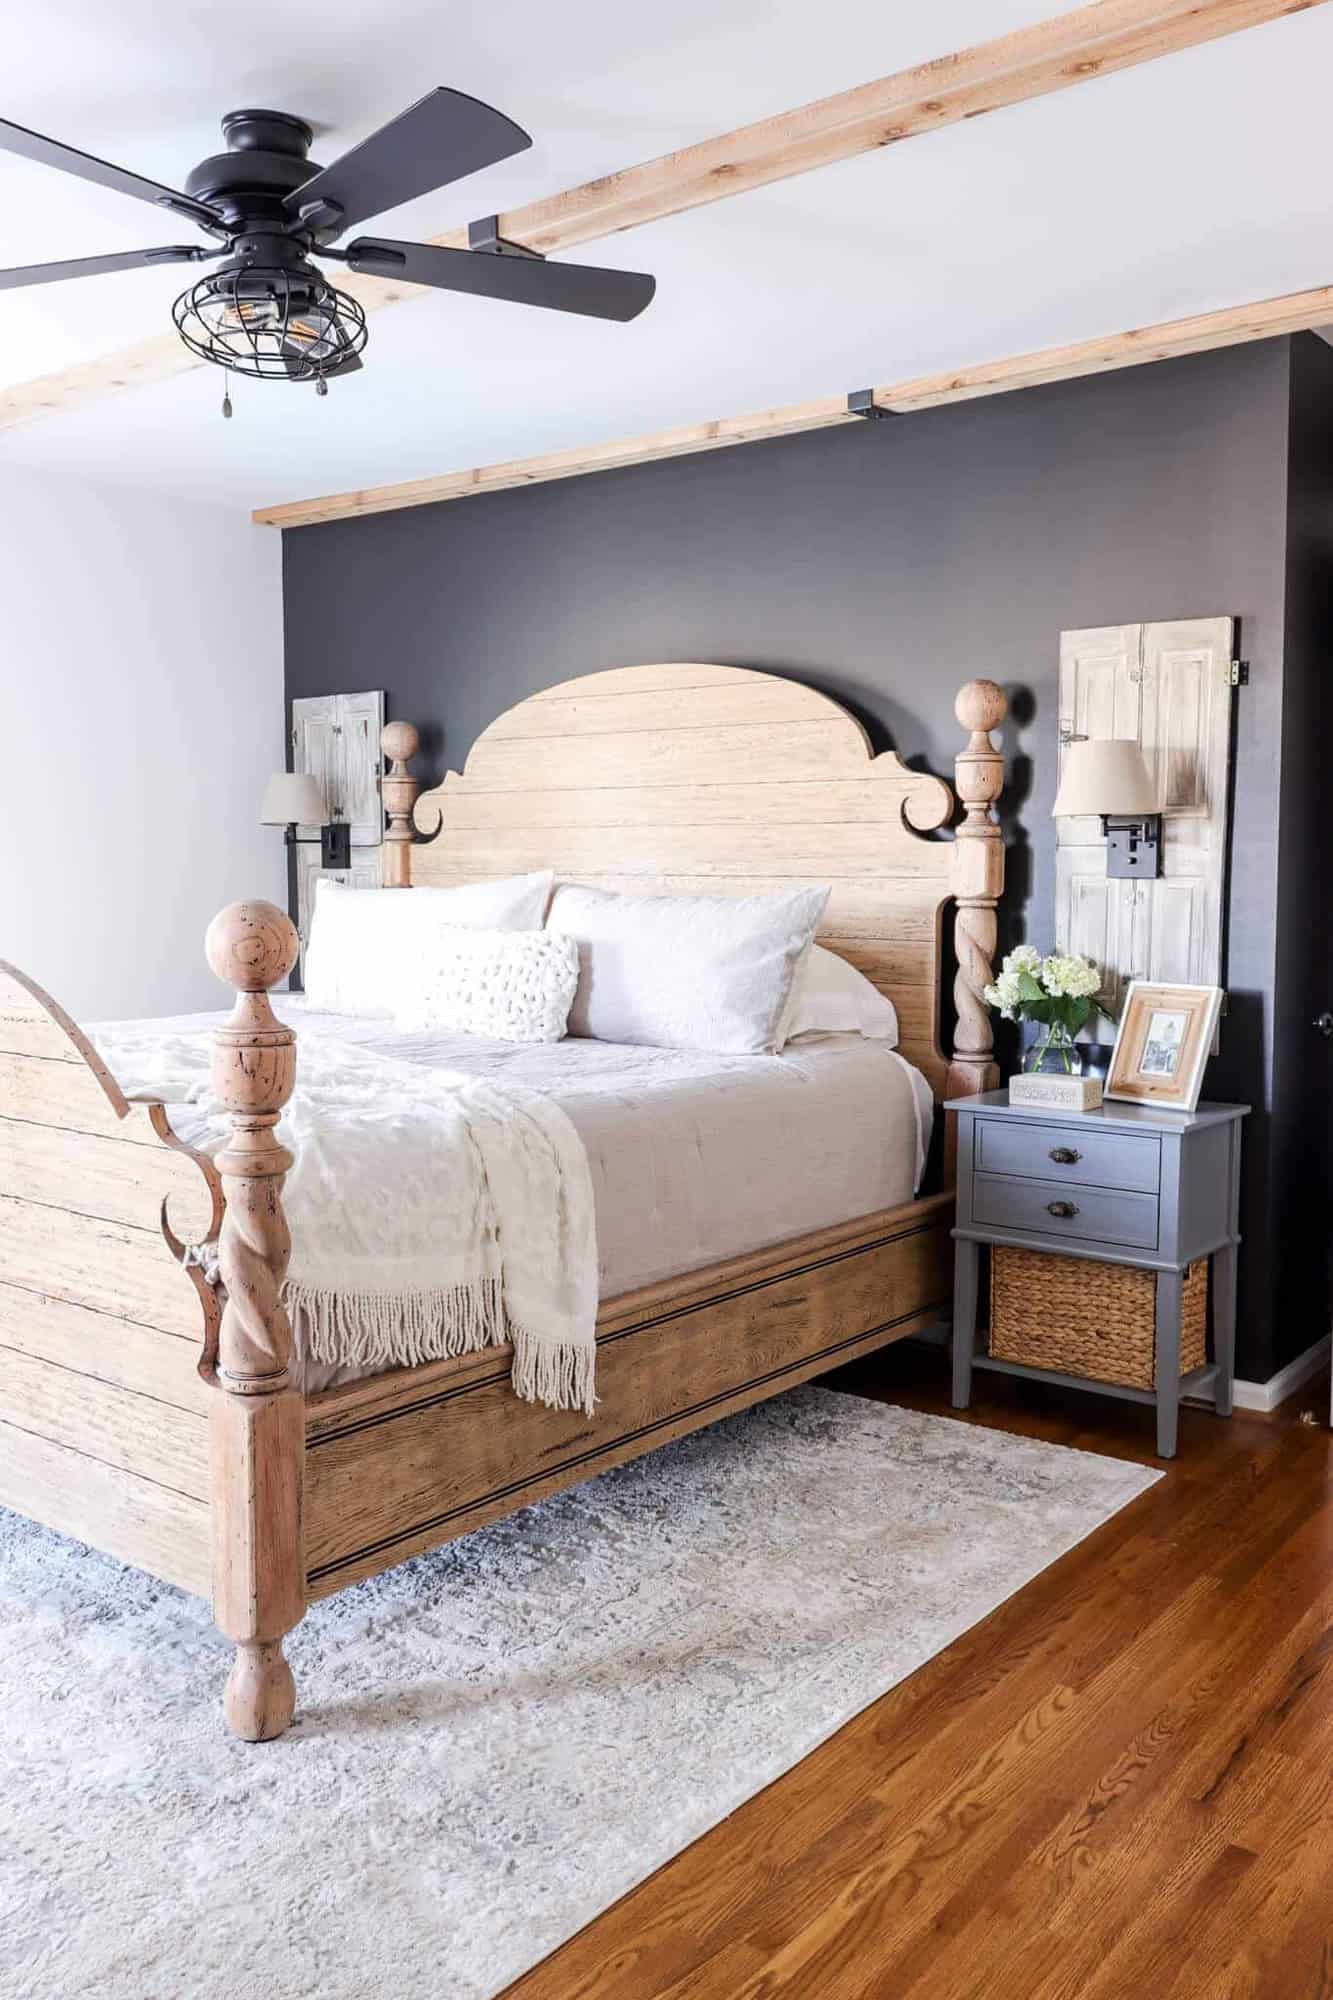 bedroom decorated with a modern French country style with cedar ceiling beams, black accent wall, and cannonball unfinished bed with tan bedding